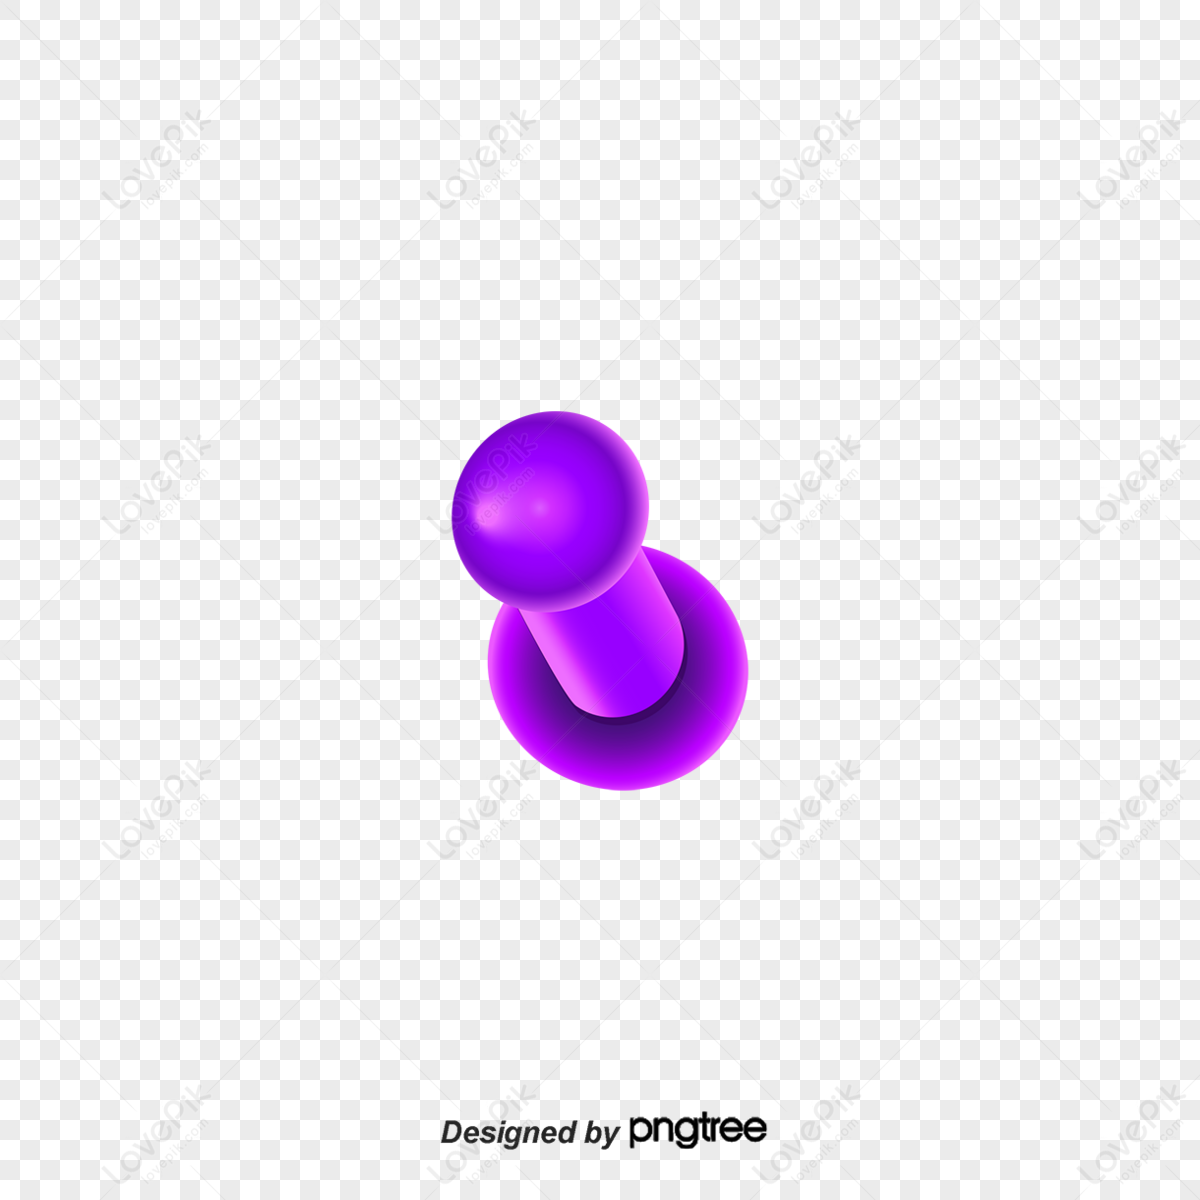 Push Pin transparent background PNG cliparts free download